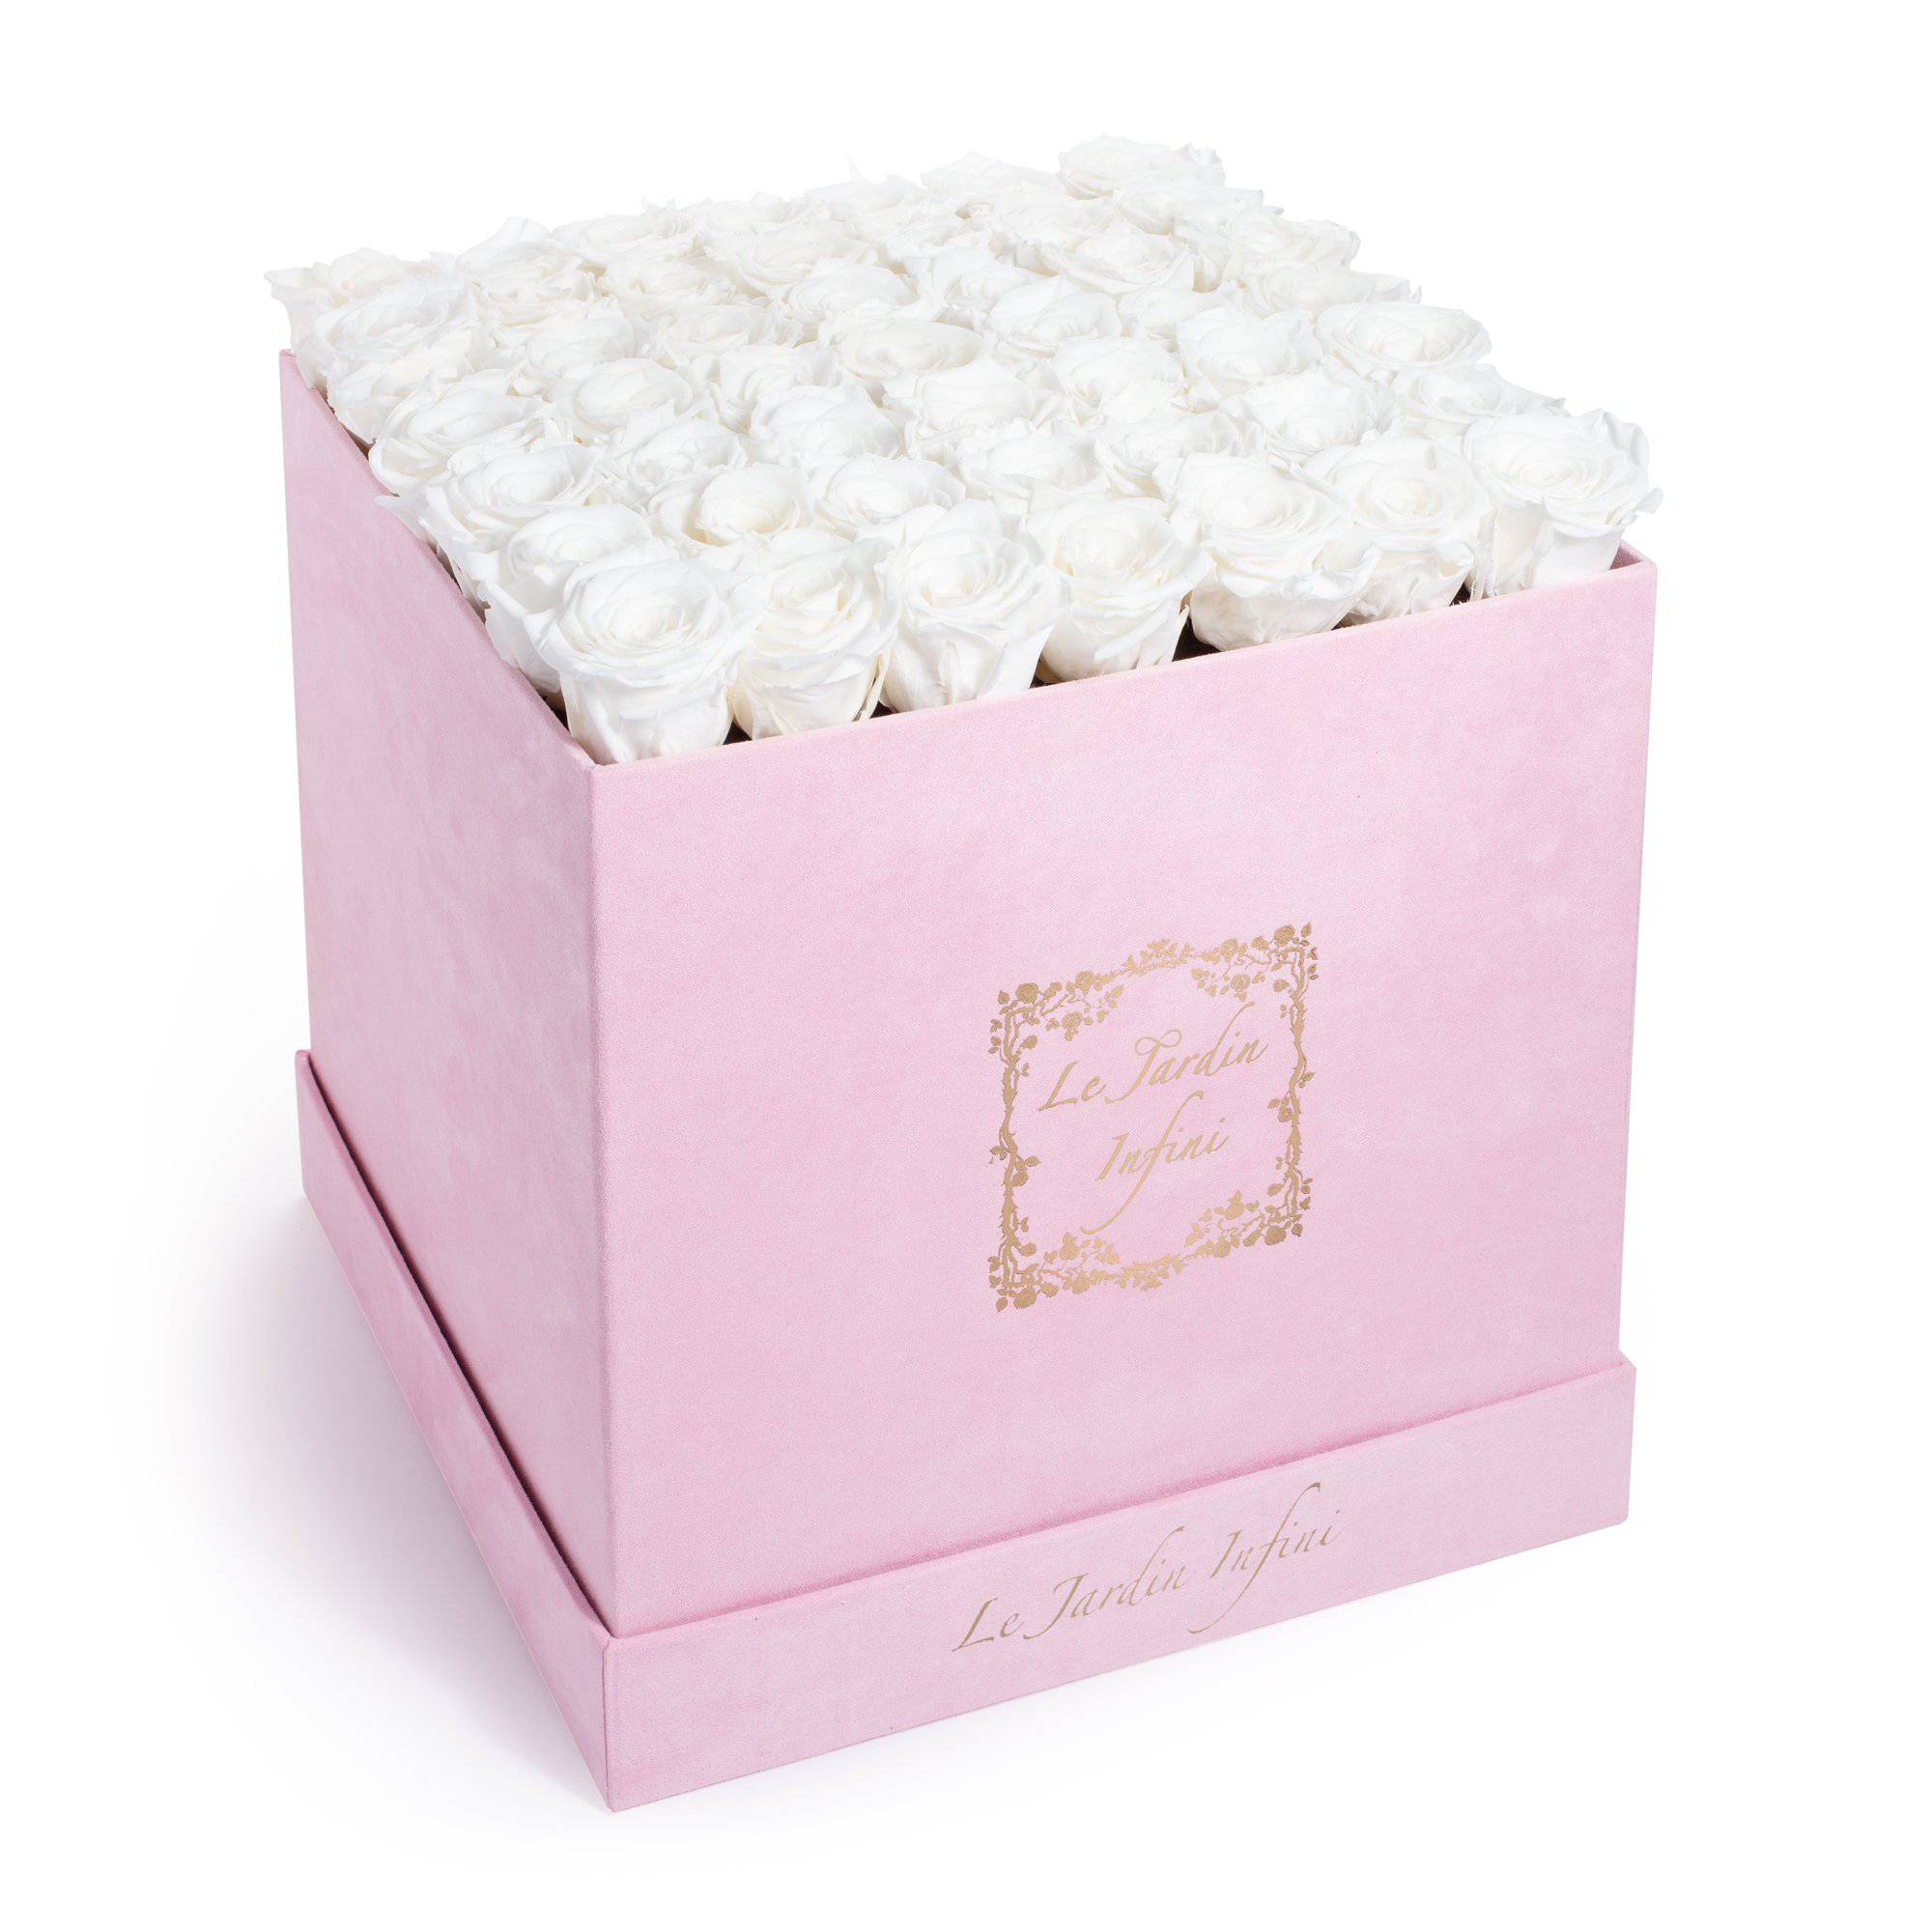 White Preserved Roses  - Large Square Luxury Pink Suede Box - Le Jardin Infini Roses in a Box